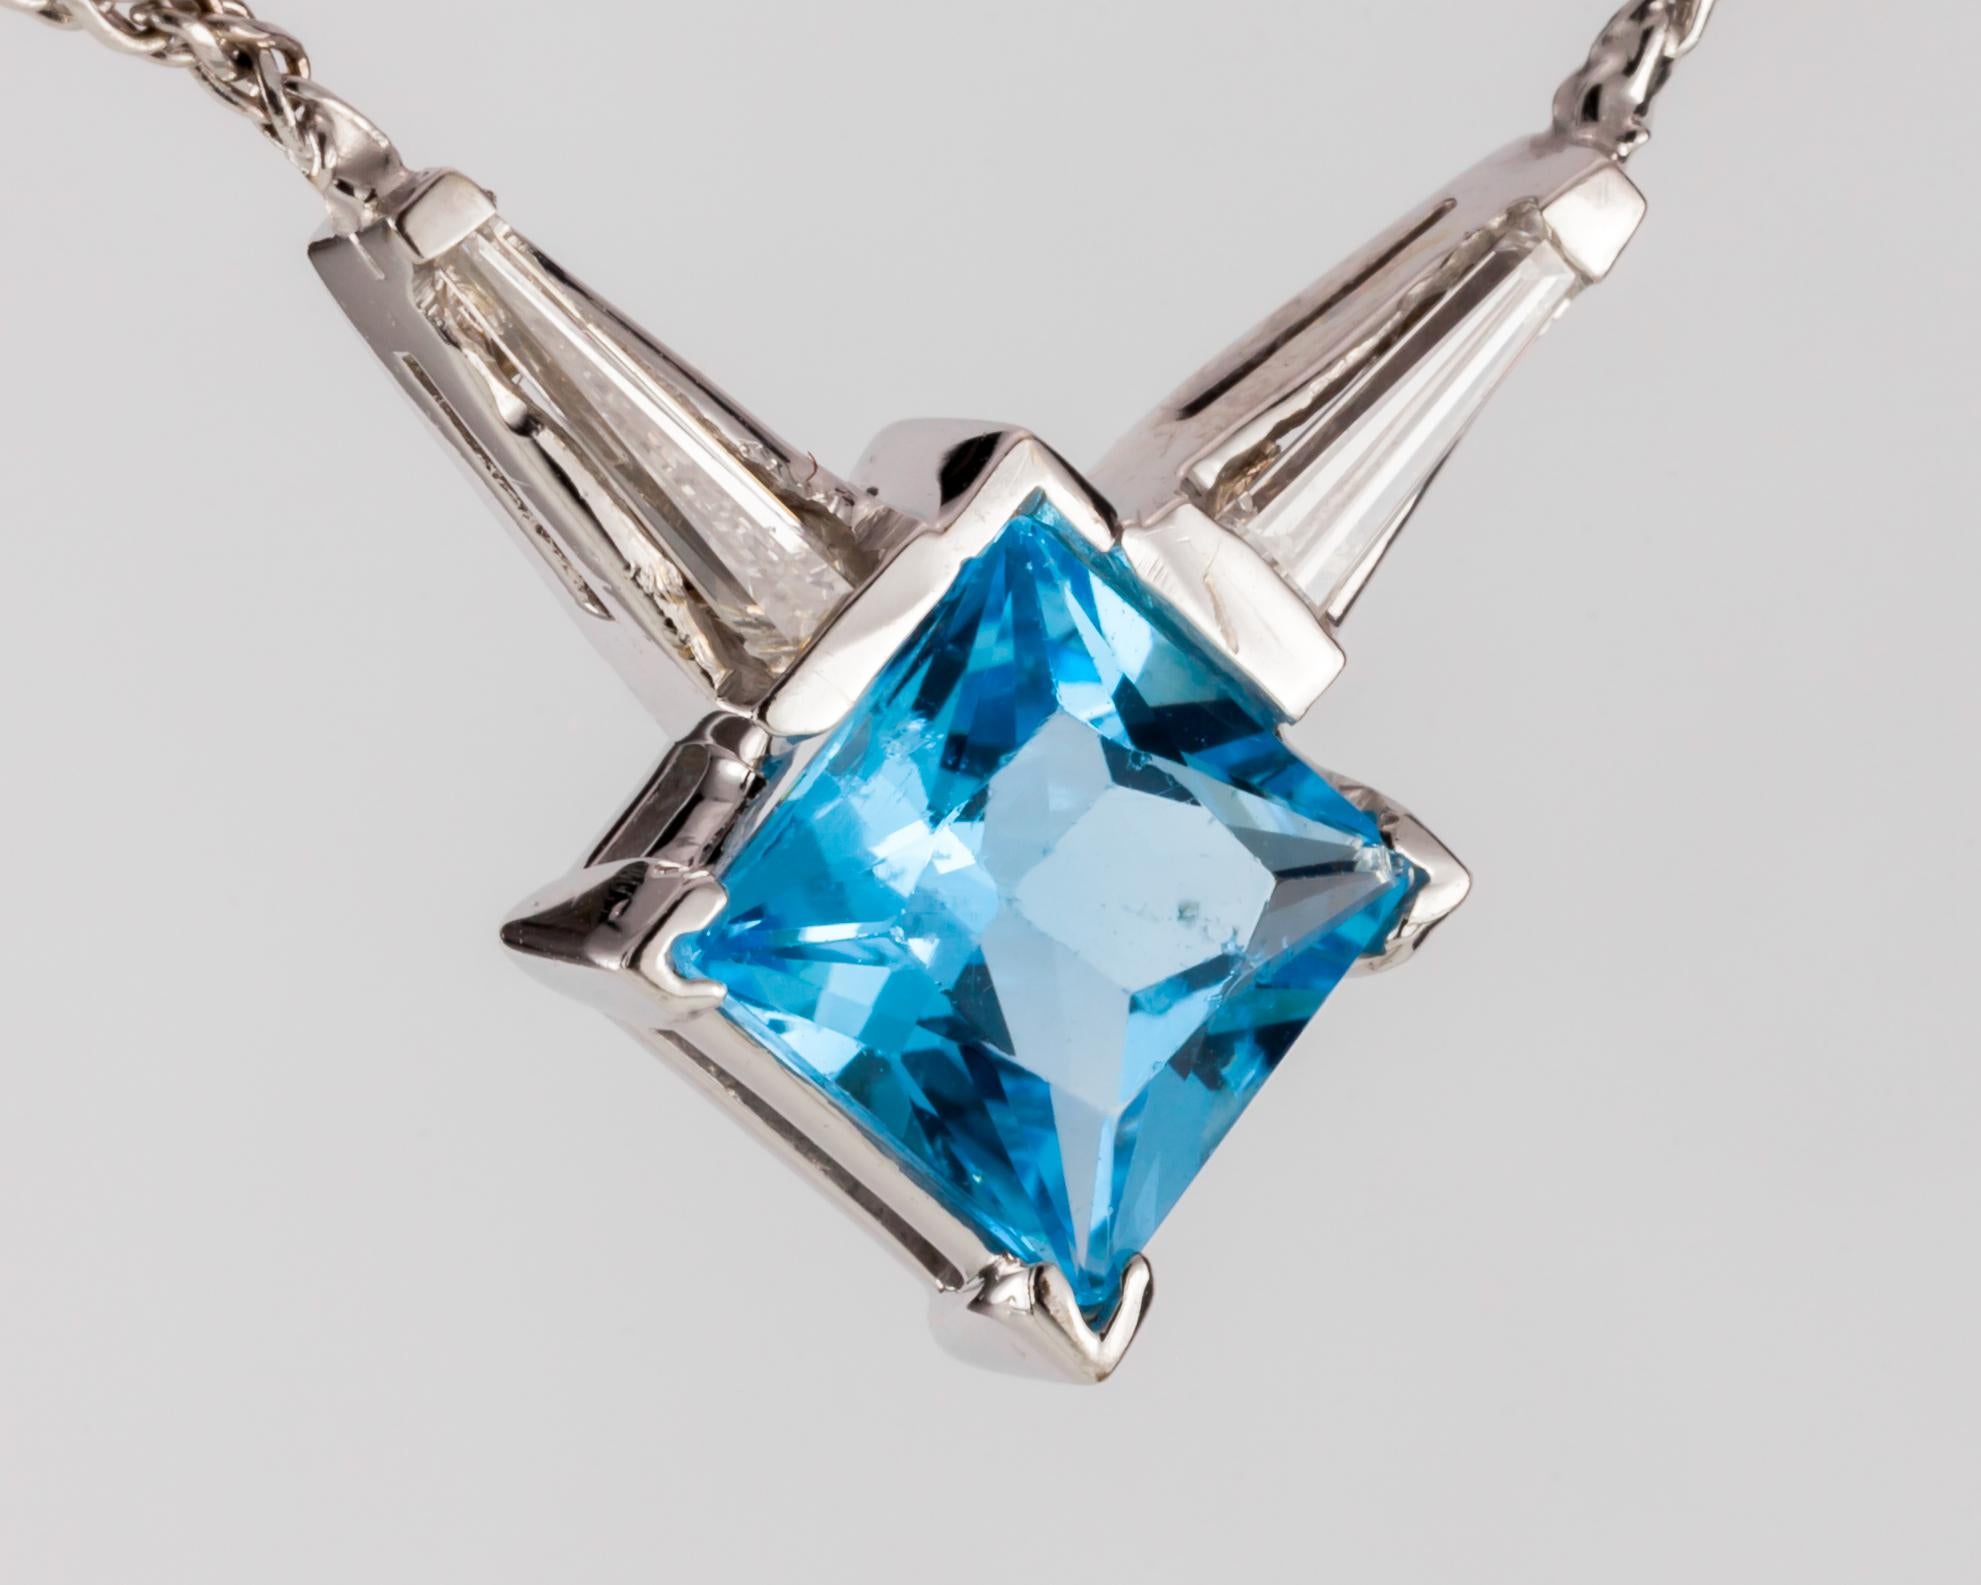 14k White Gold Blue Topaz Pendant with 0.25 Carat Diamond Accents & Gold Chain In Good Condition For Sale In Sherman Oaks, CA